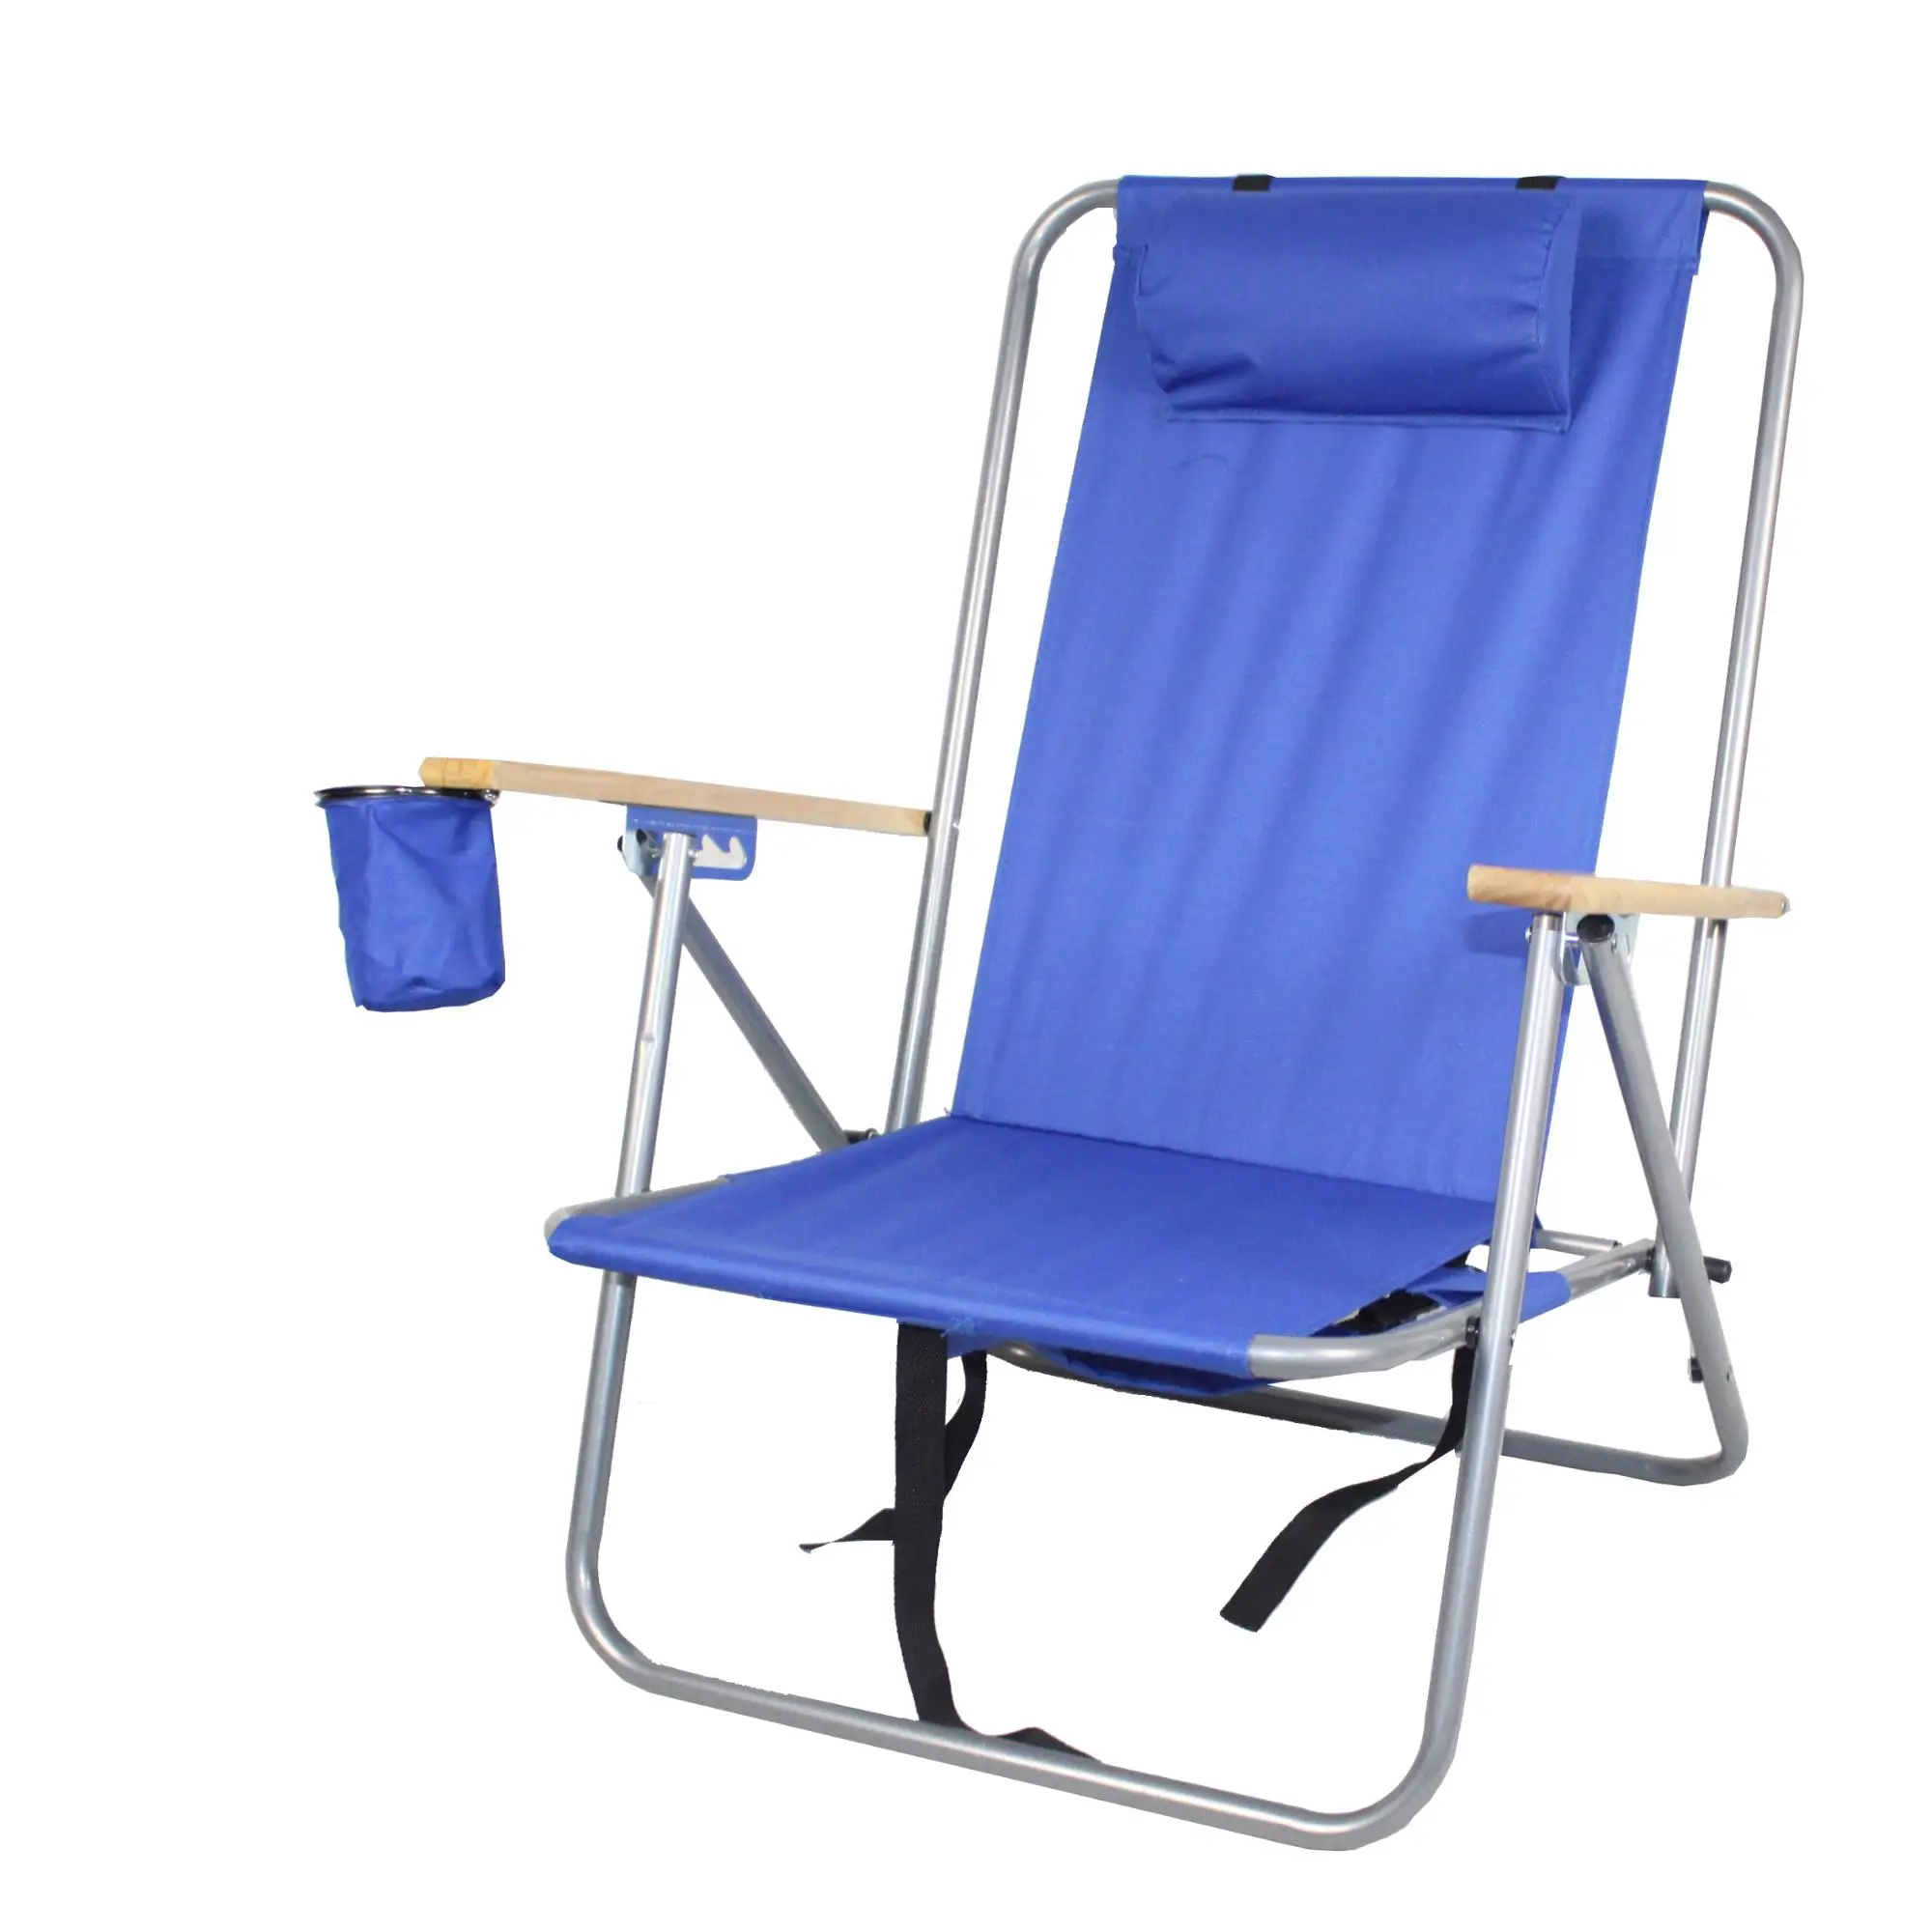 Creatice Buy Beach Chair for Large Space